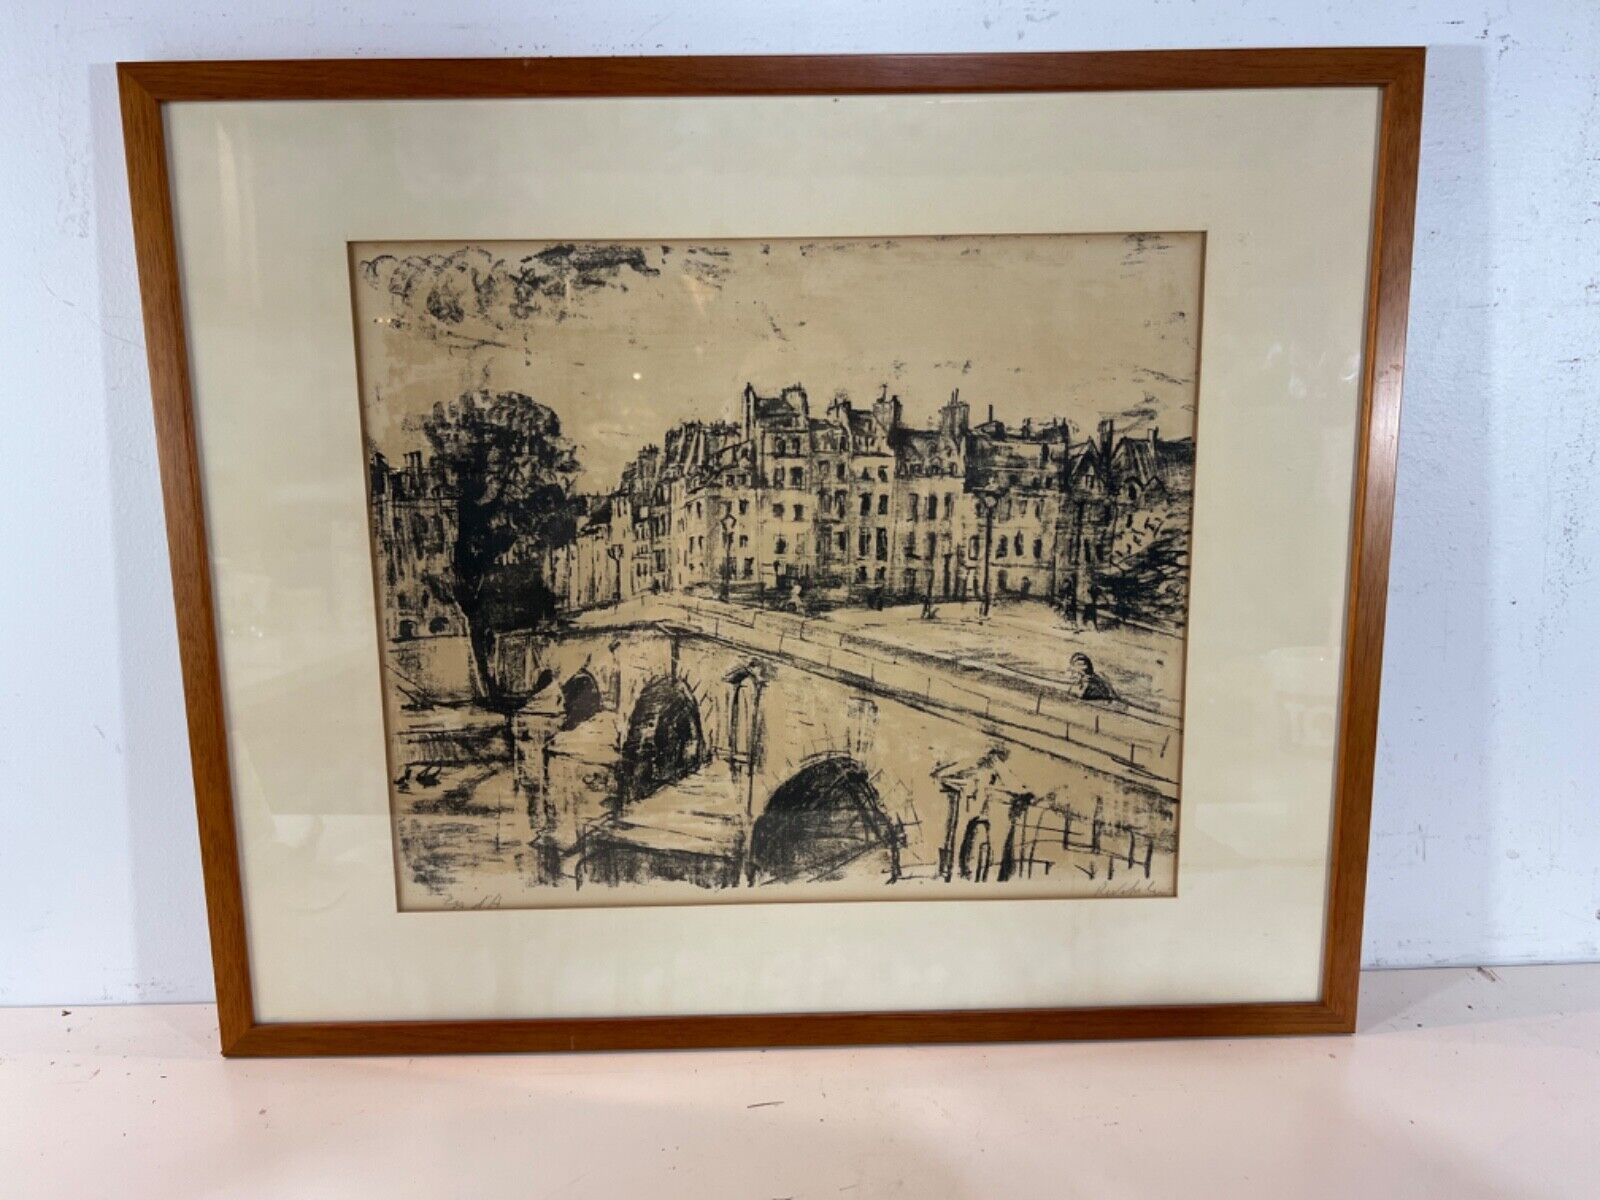 Antique European Street Scene Framed Lithograph Signed by Artist